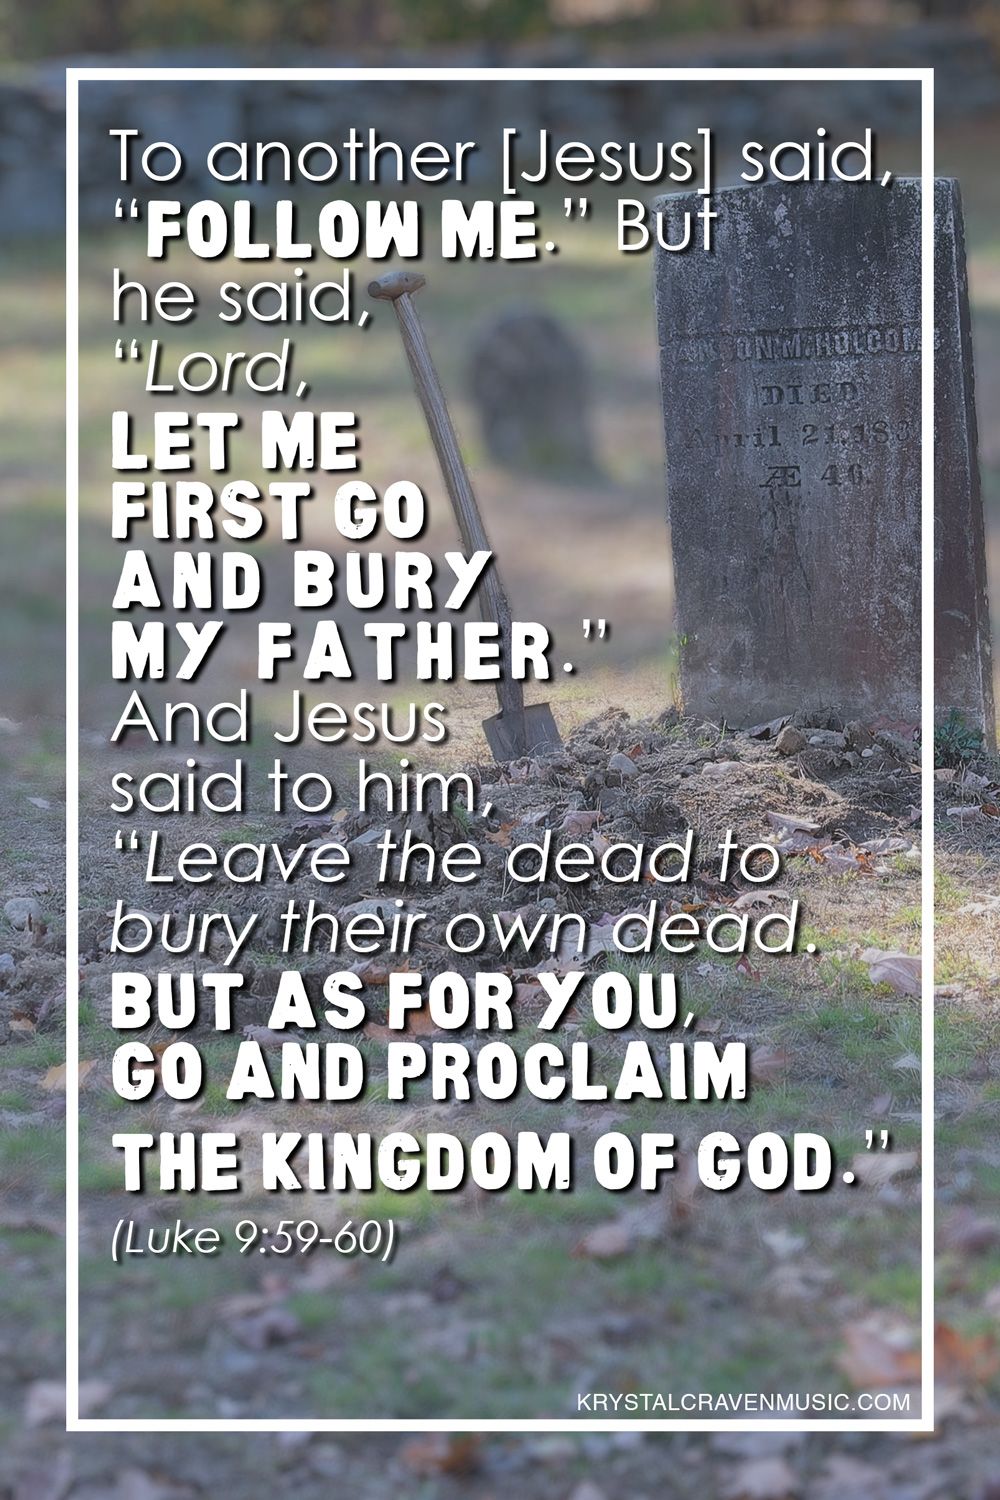 The Bible verse text from Luke 9:59-60: "To another [Jesus] said, “Follow me.” But he said, “Lord, let me first go and bury my father.” And Jesus said to him, “Leave the dead to bury their own dead. But as for you, go and proclaim the kingdom of God.”" This scripture is overlaying a a gravestone with disturbed dirt and a shovel sticking out of the ground.